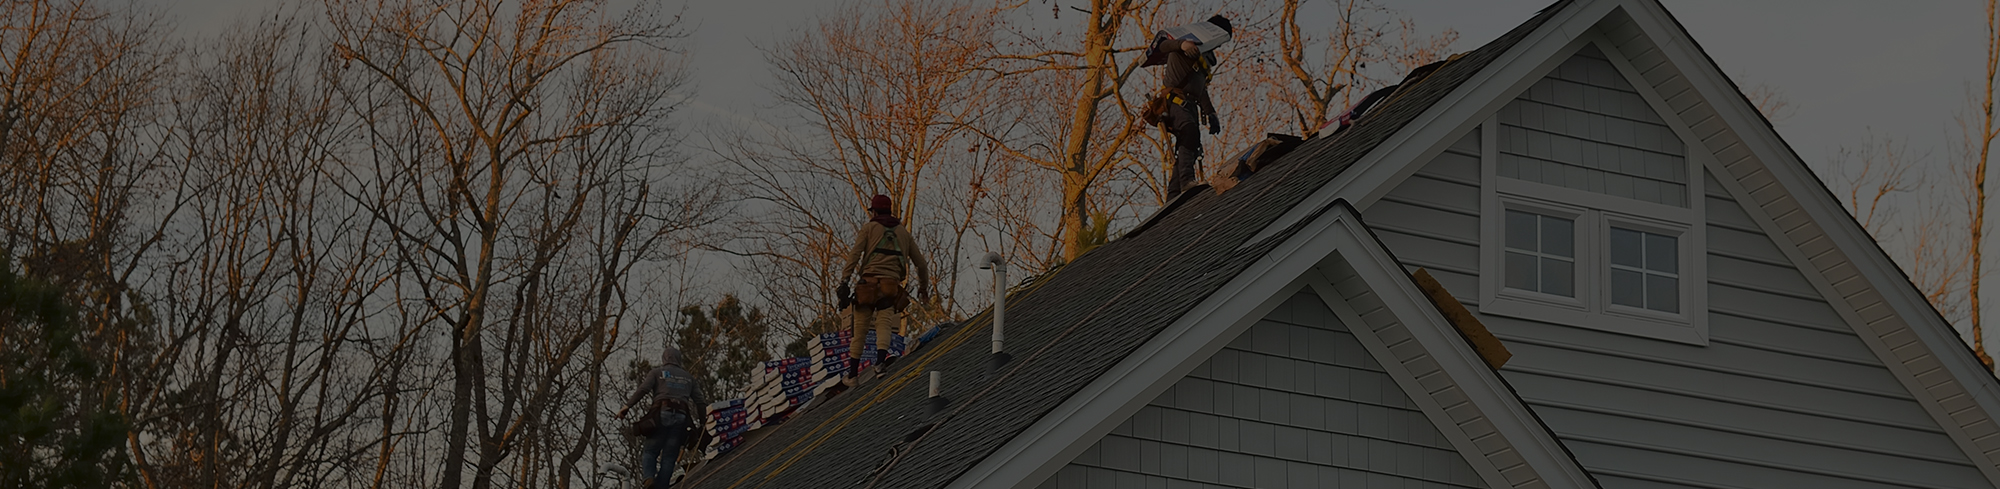 Deerfield roof installation and repair services